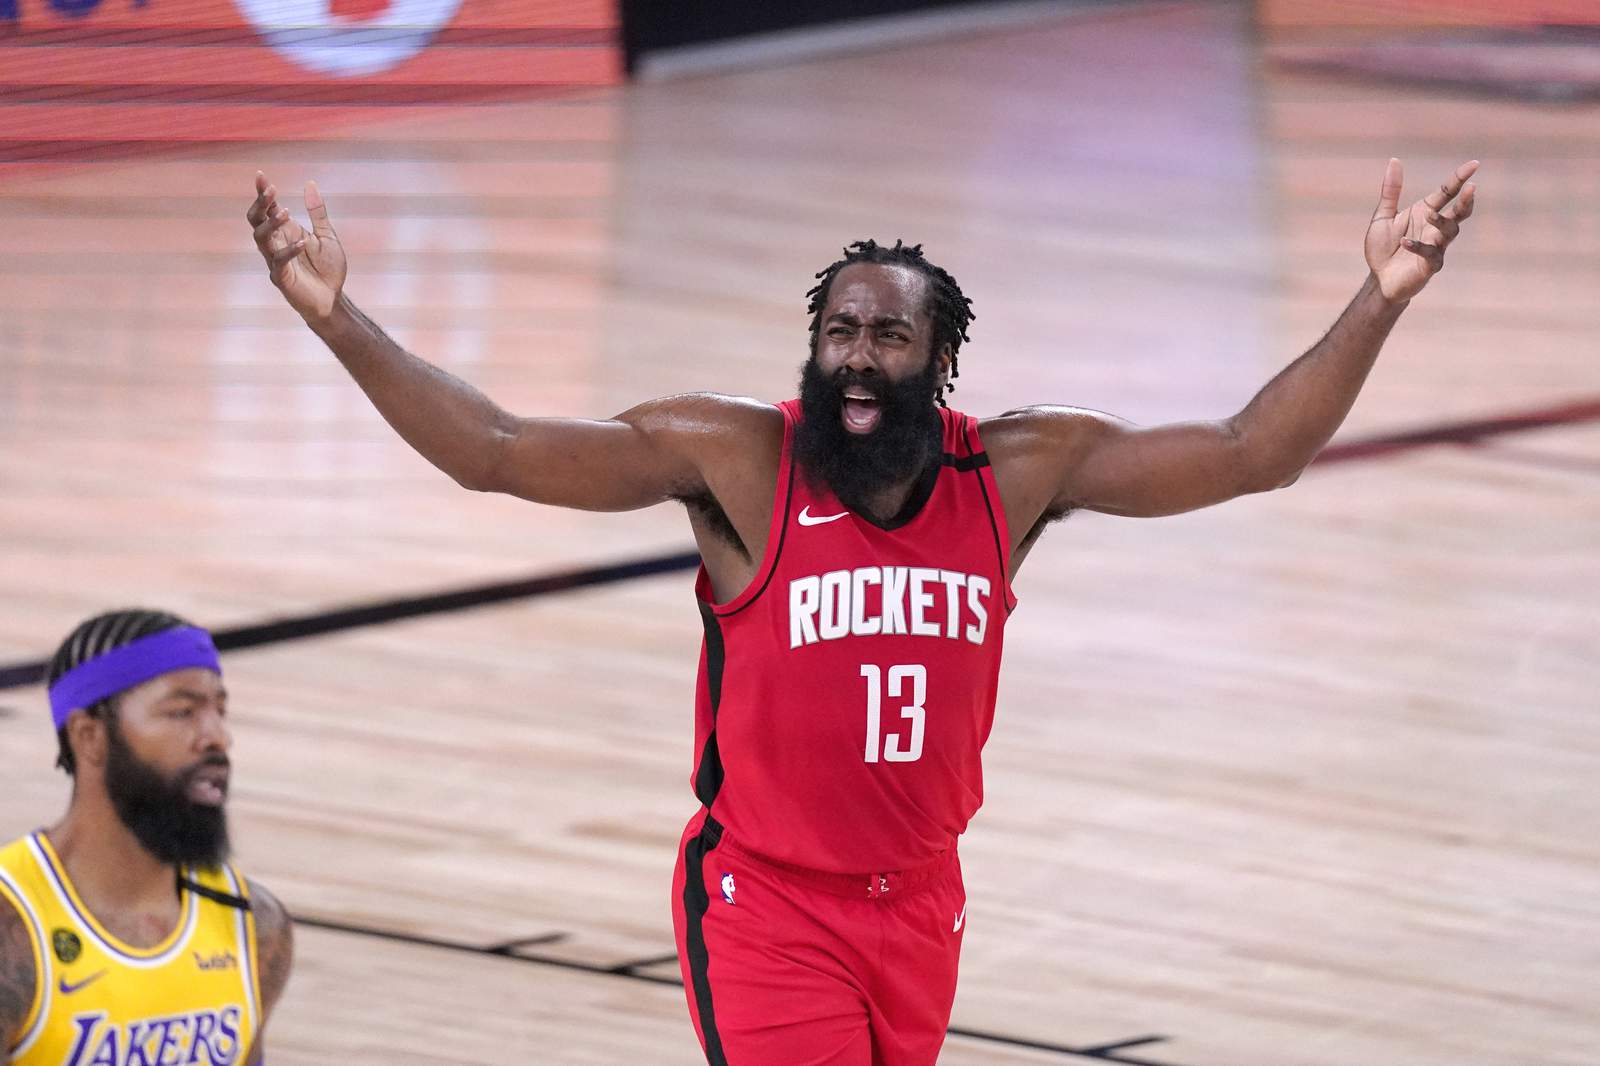 Rockets James Harden Russell Westbrook Make All Star Team Lebron Makes Team For Record 16th Time